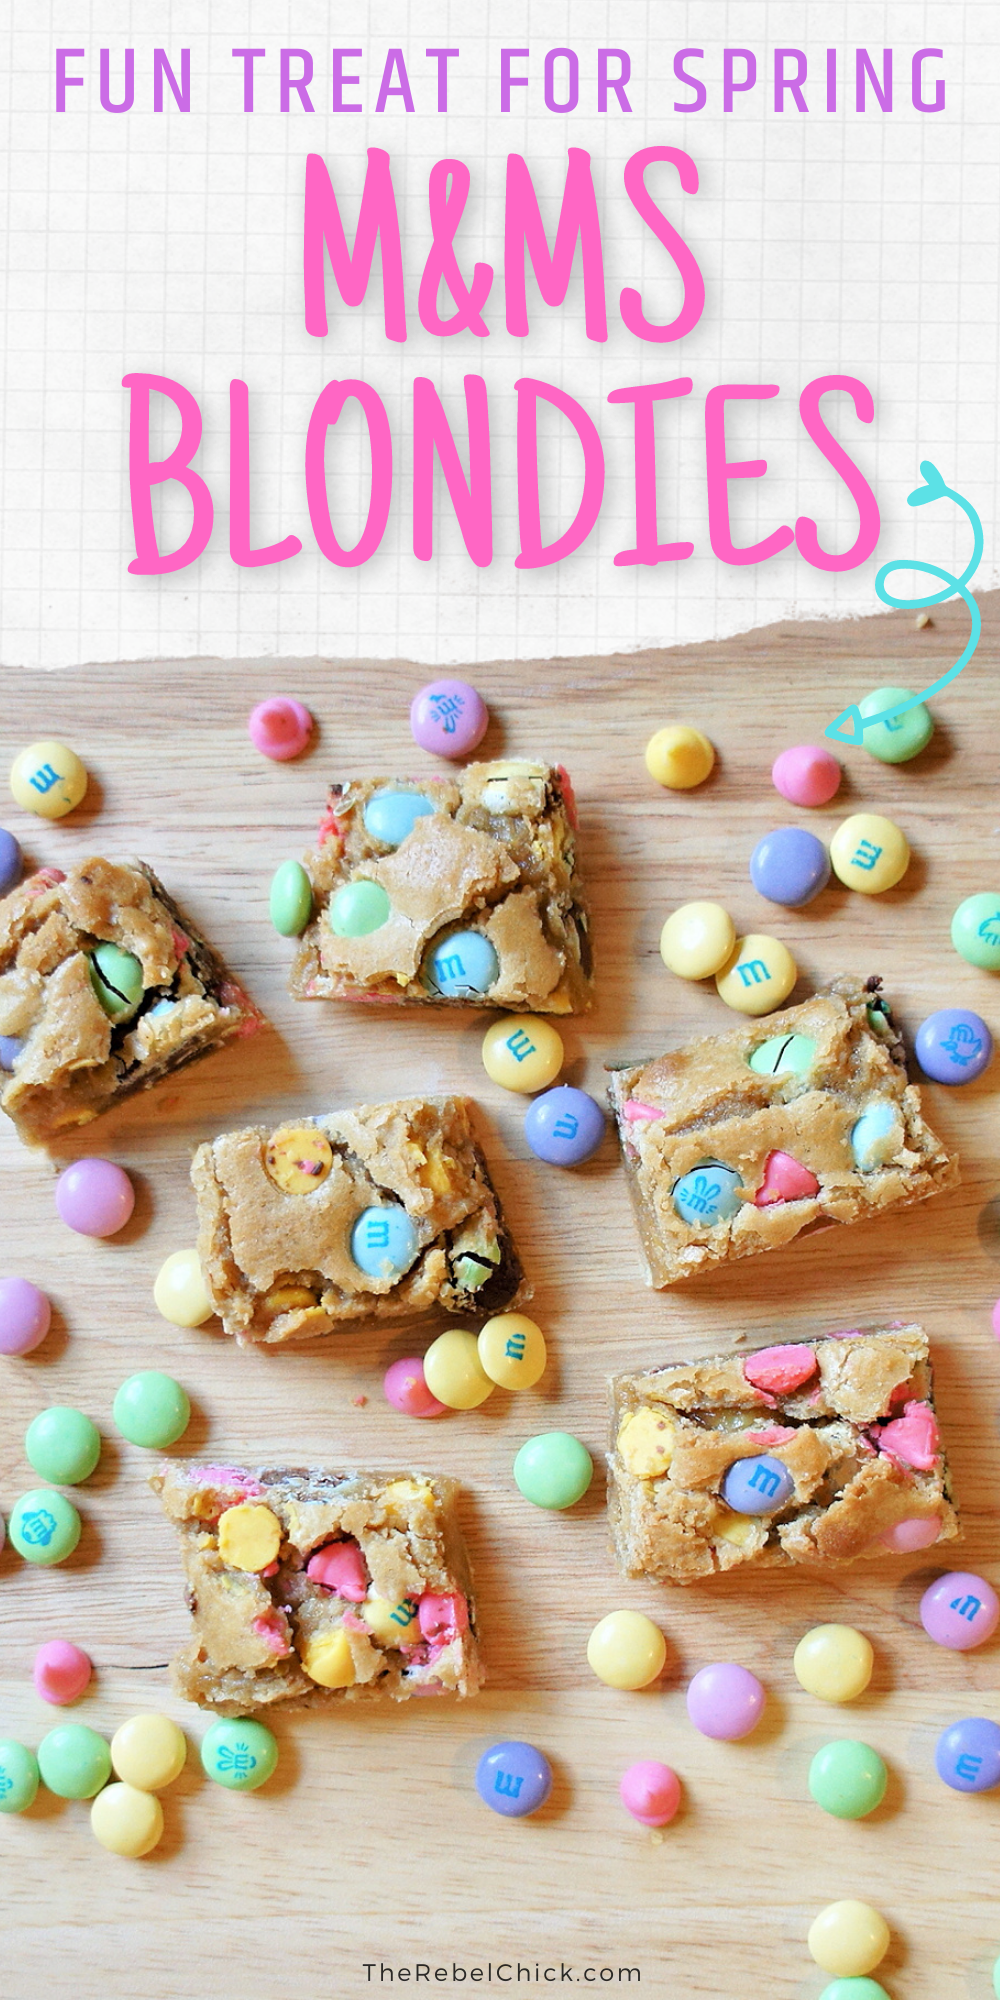 Blondies Bars with pastel colored chocolate chips and M&Ms